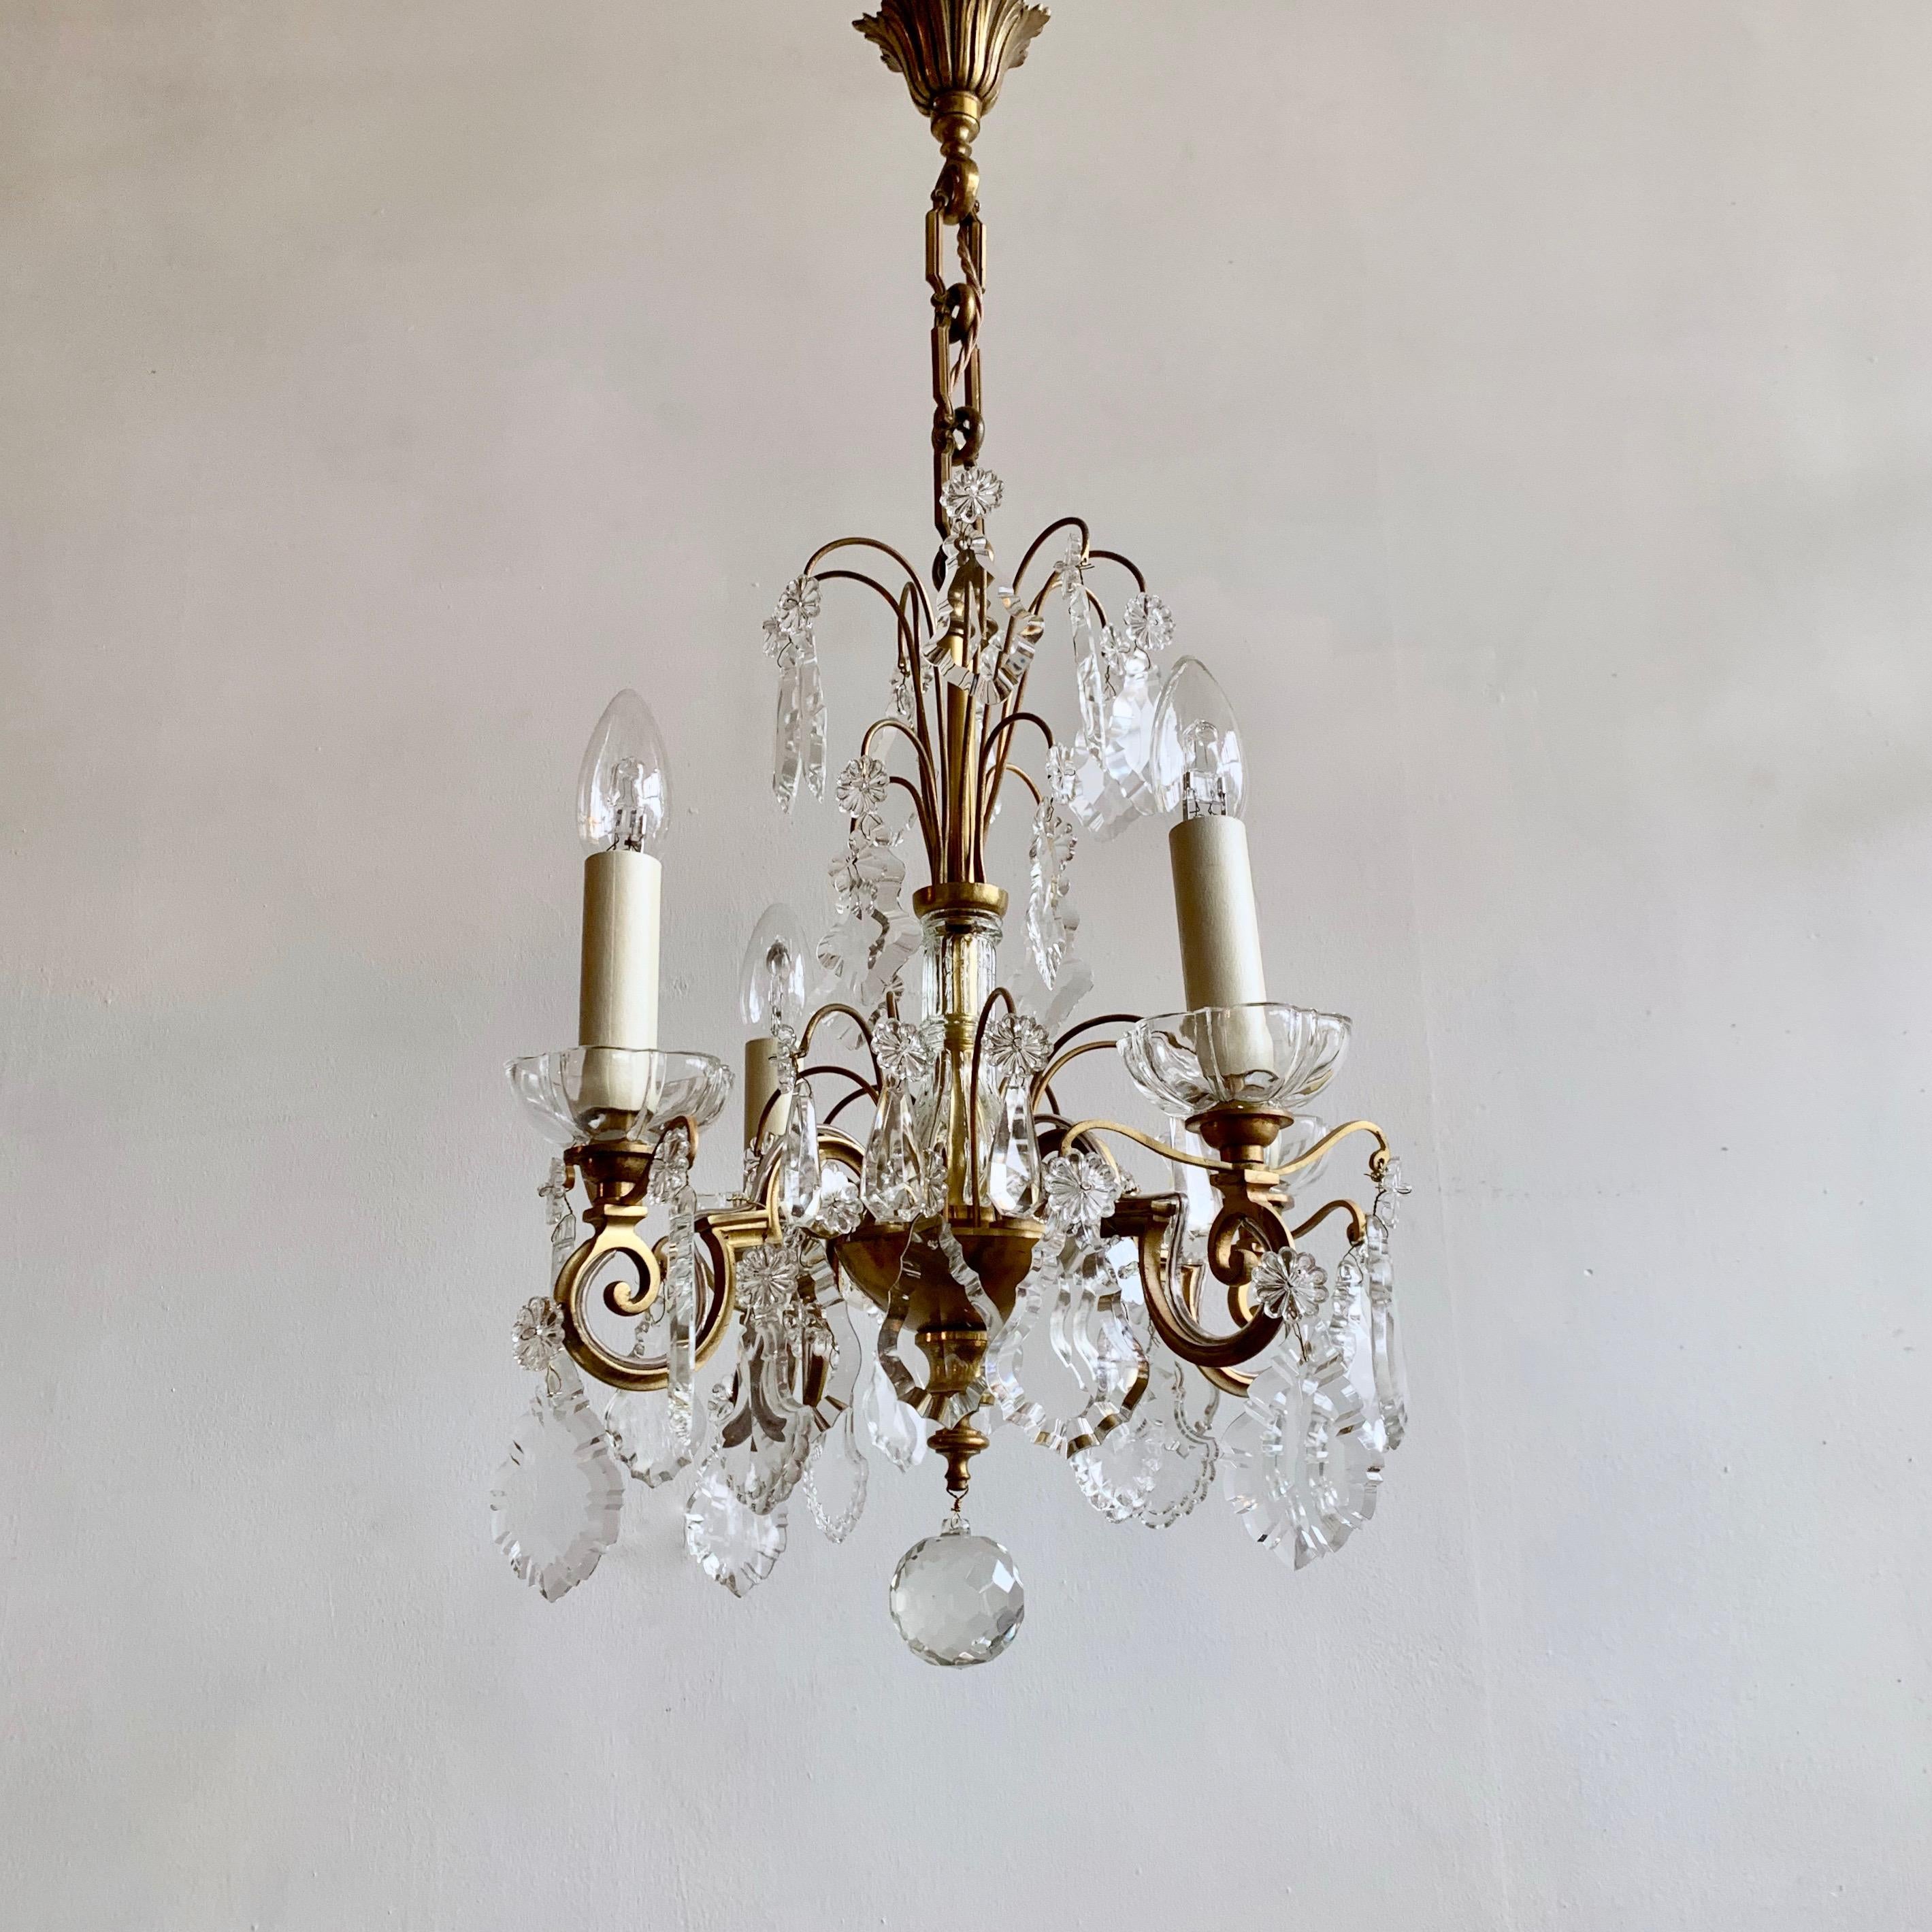 This small Louis XIV style chandelier originates from early 1900s, France. Retaining it’s original glass it is a stunning center piece. The brass chandelier frame has varied natural patina and unique glass bobéche pans which will reflect the light.